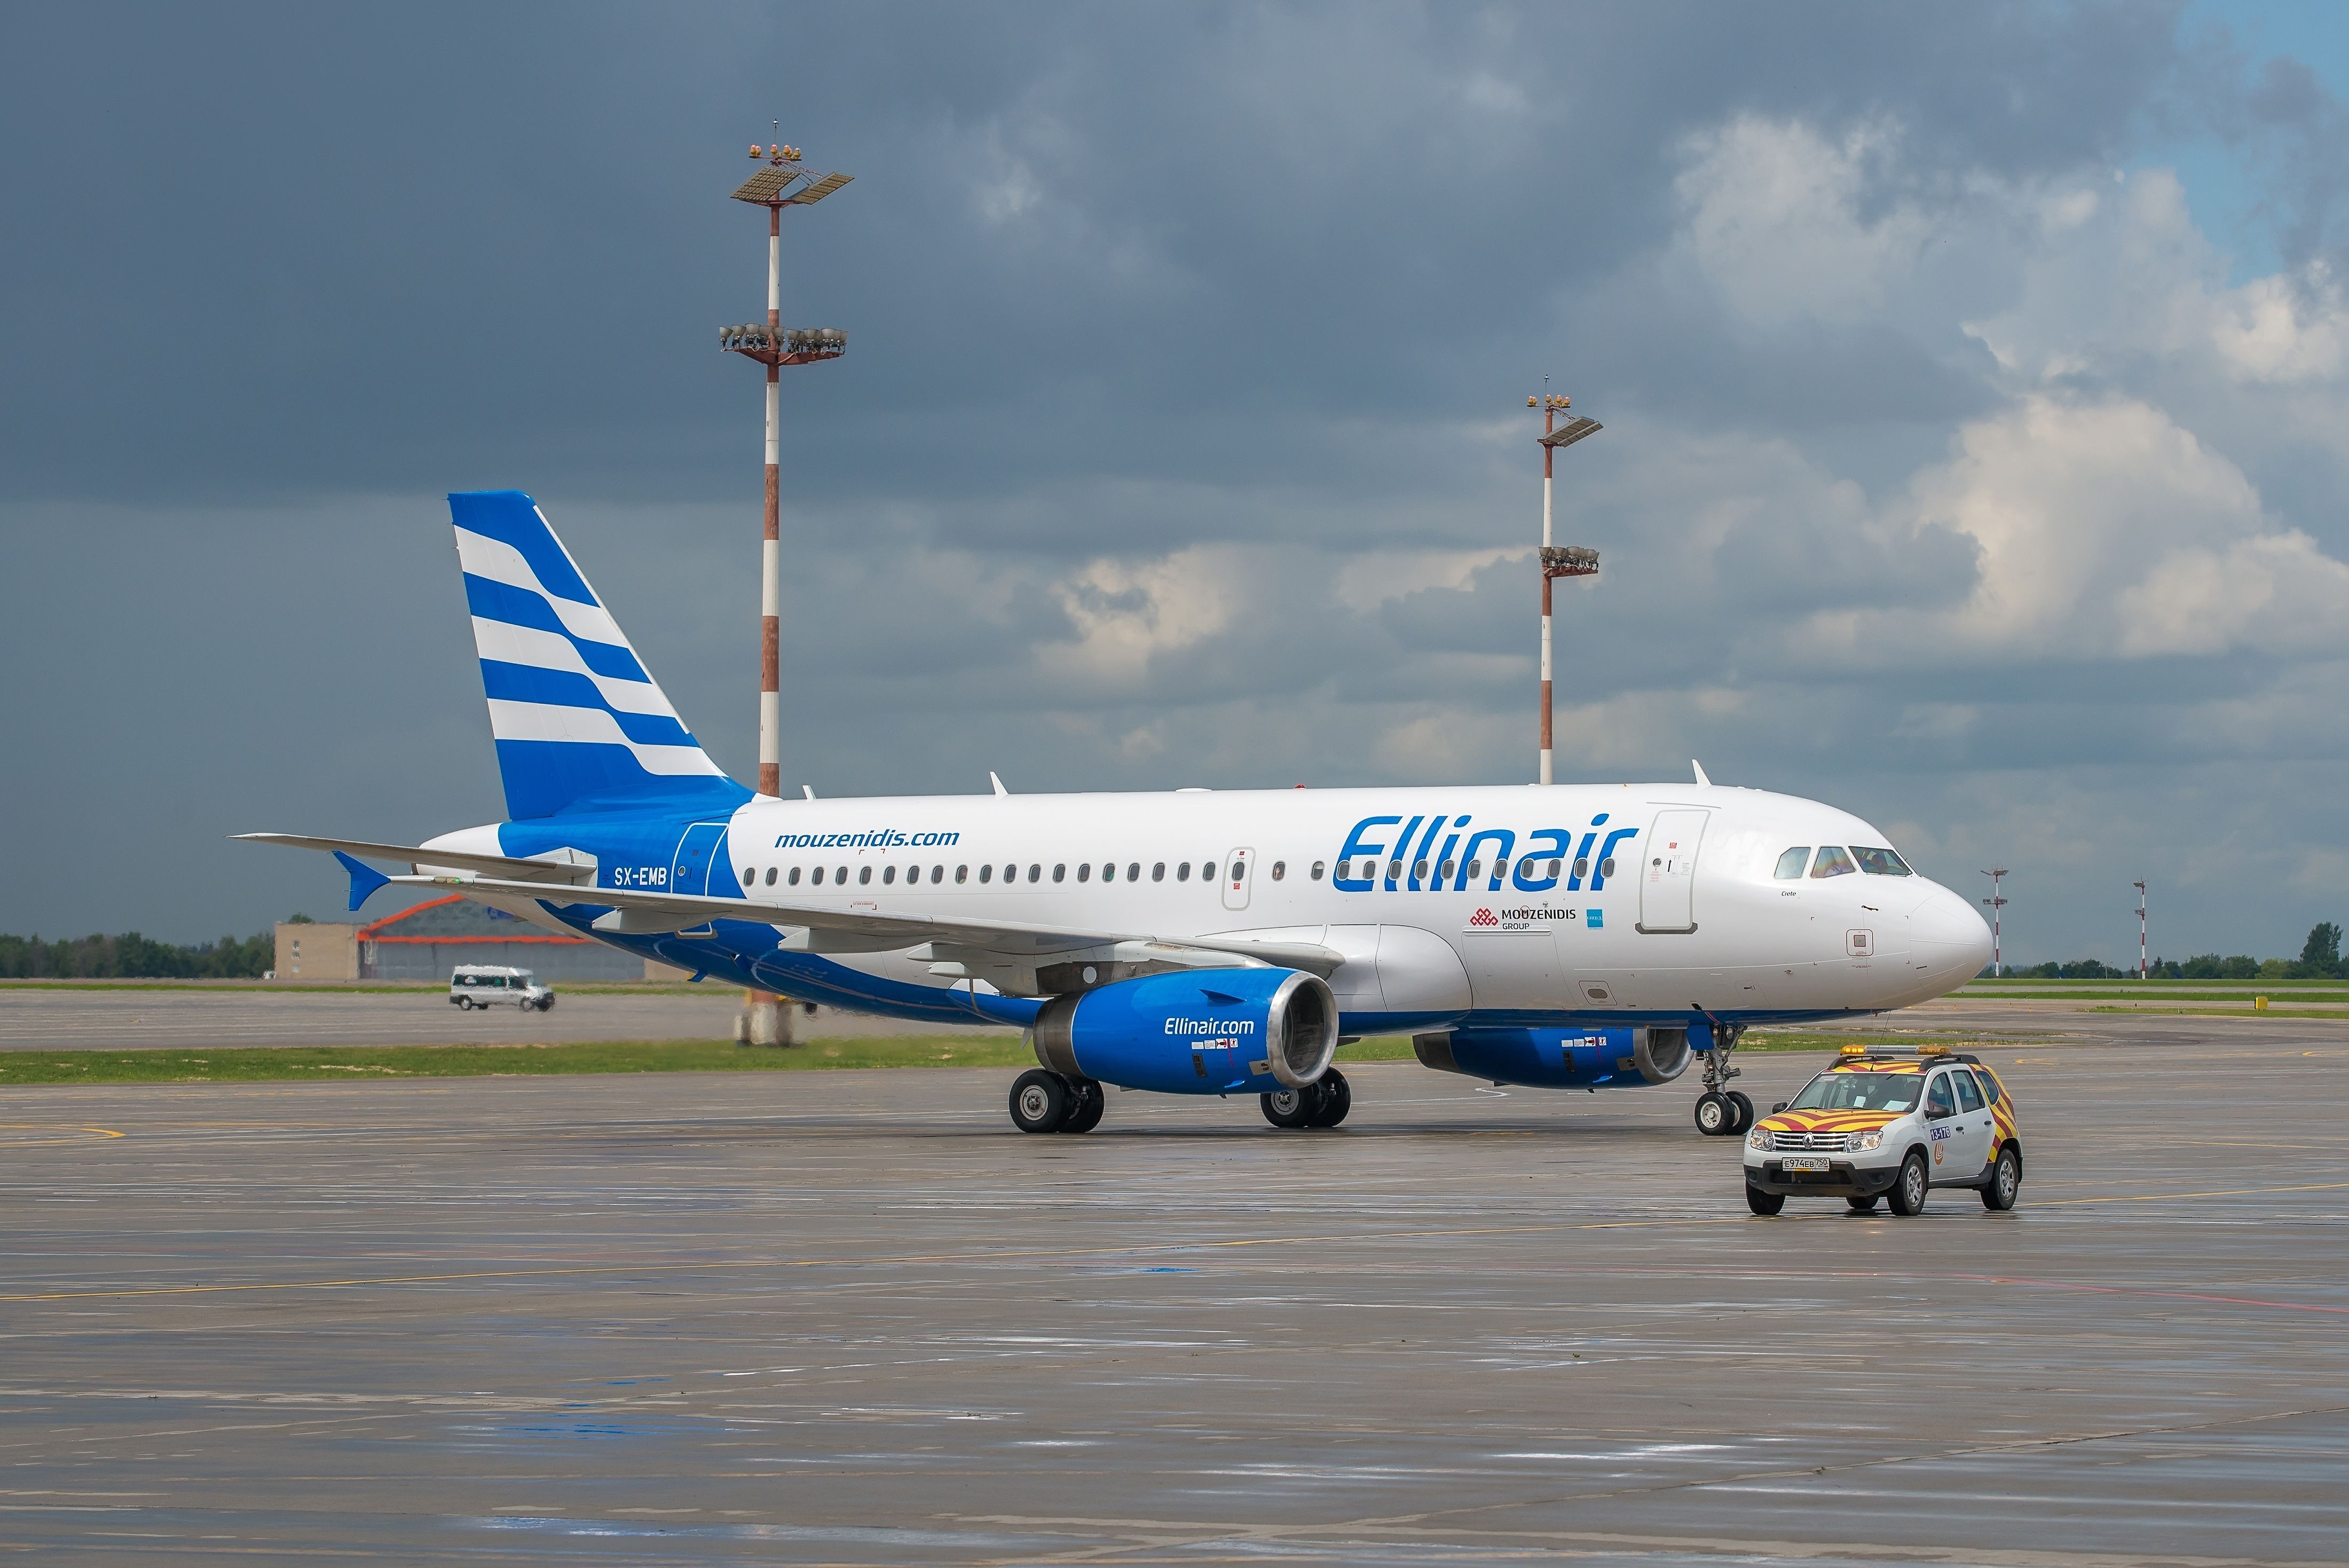 An Ellinair Airbus A319 and Follow Me Car on an airport apron.